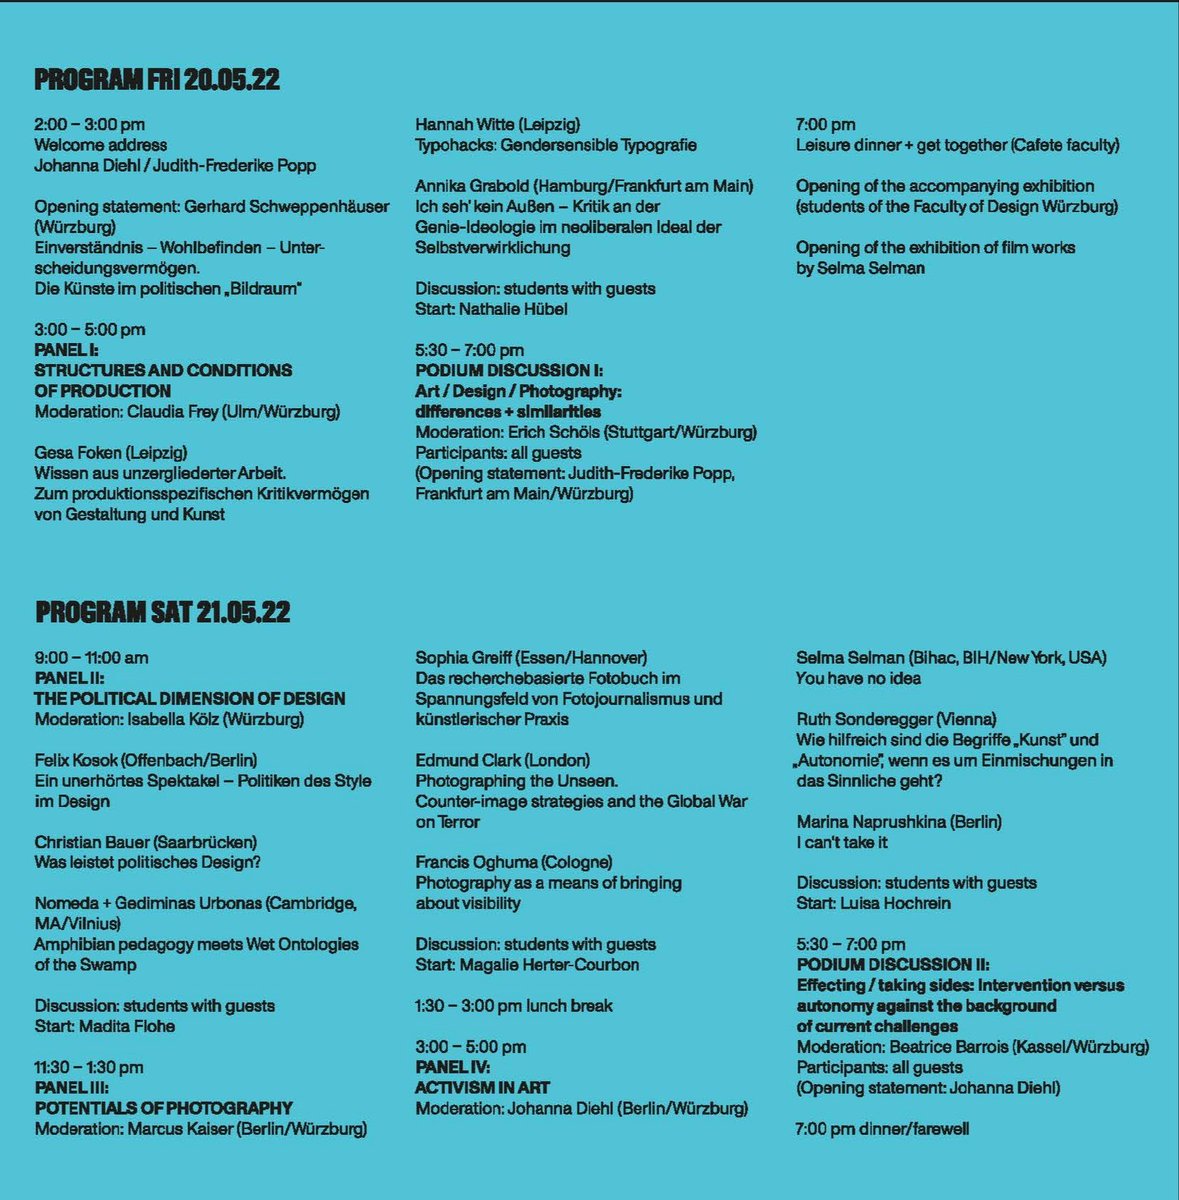 The program for 'Taking Sides. Design and Art between Autonomy and Intervention' (20.-21.05.22) is complete! Th event will be accessible in person and on zoom. Registration is open until May 6th through: fg.fhws.de/taking-sides We are looking forward to interested participants!